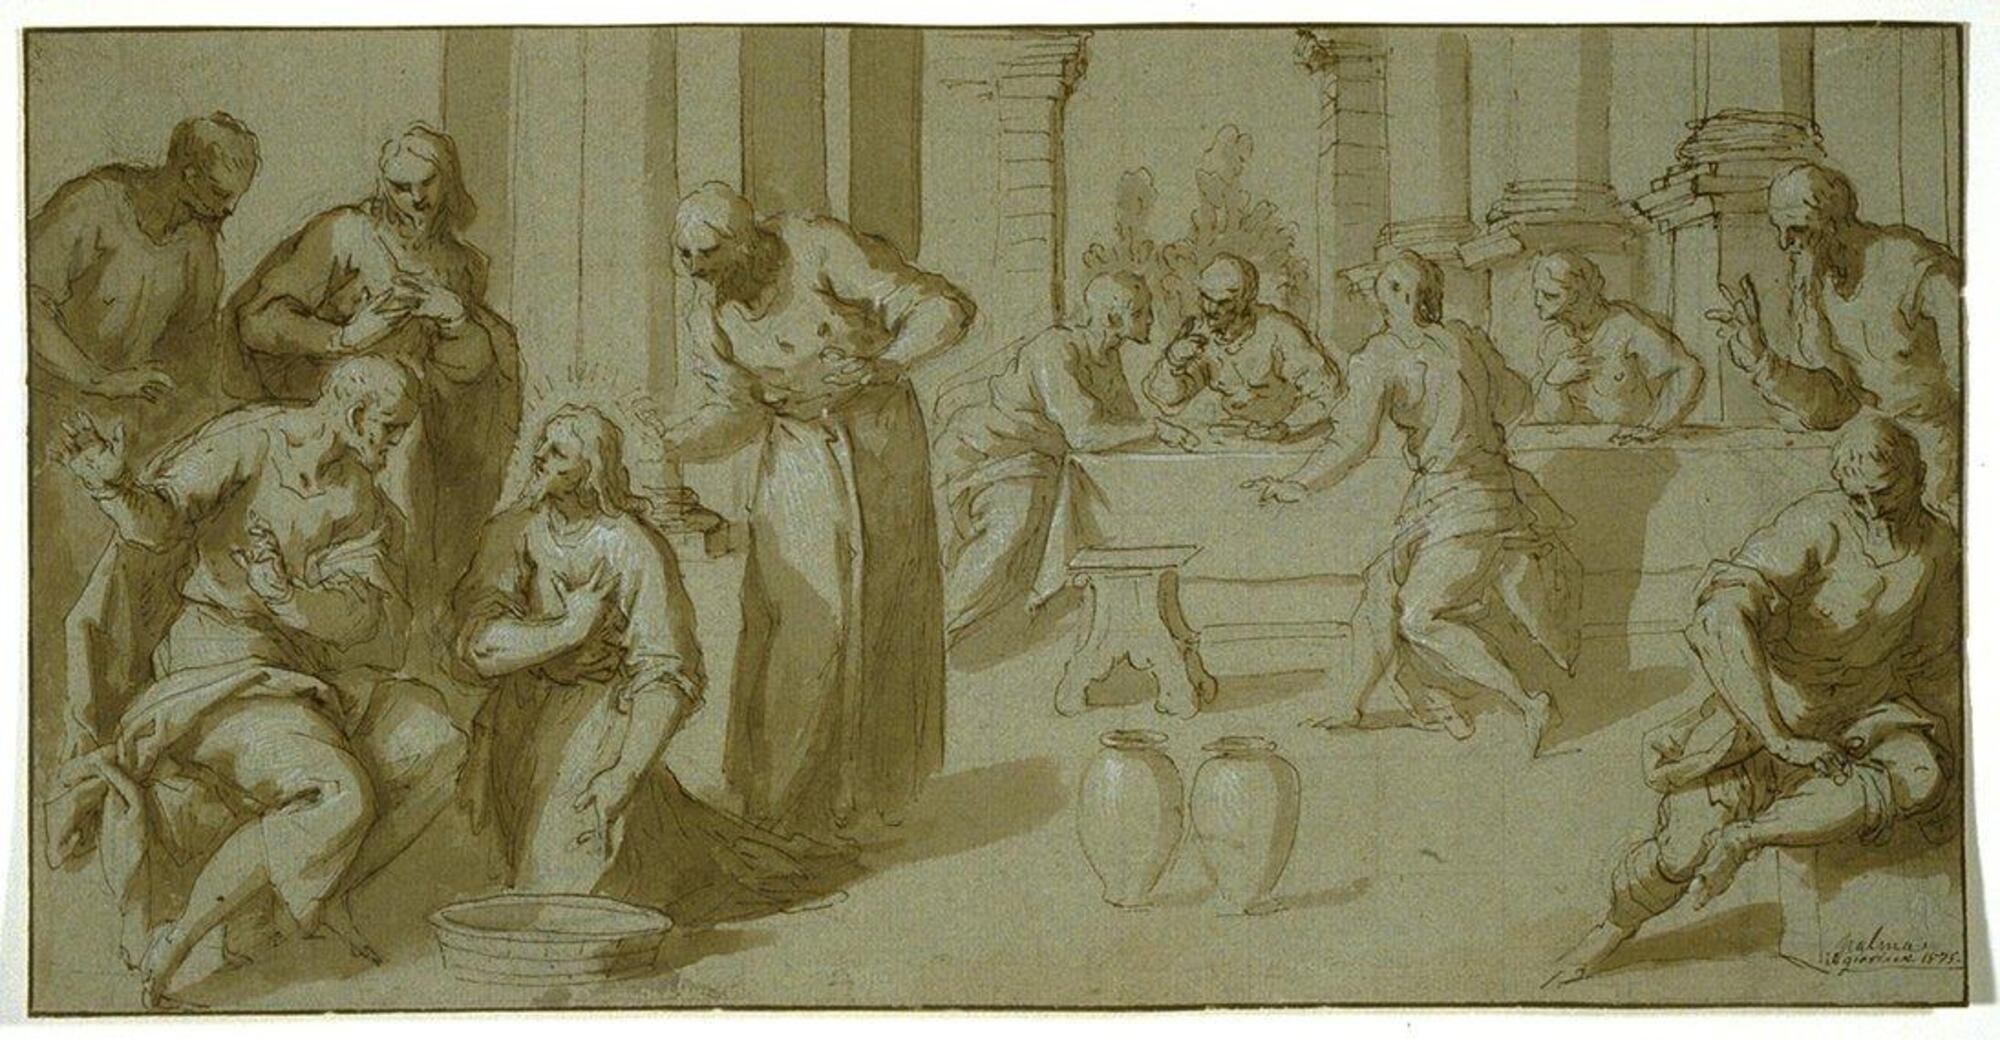 This pen, ink, and wash drawing on blue-gray paper is horizontally oriented. It portrays an open interior space, and on the left is a scene in the foreground with Christ with a halo, surrounded by four figures. Christ is kneeling before a seated man, with his right hand over his heart and his left arm indicating a basin of water on the floor. The seated man twists towards Christ with his arms stretching out away from Christ. All of the figures are dressed simply in flowing robes. The right side of the drawing portrays four figures in the background around a table by an open doorway gesturing in conversation. In front of the table are two vessels and a stool. At the far right, in the foreground, are two more figures, one seated on an object that bears the artist&rsquo;s signature, and the other standing behind him and making a hand gesture towards Christ.